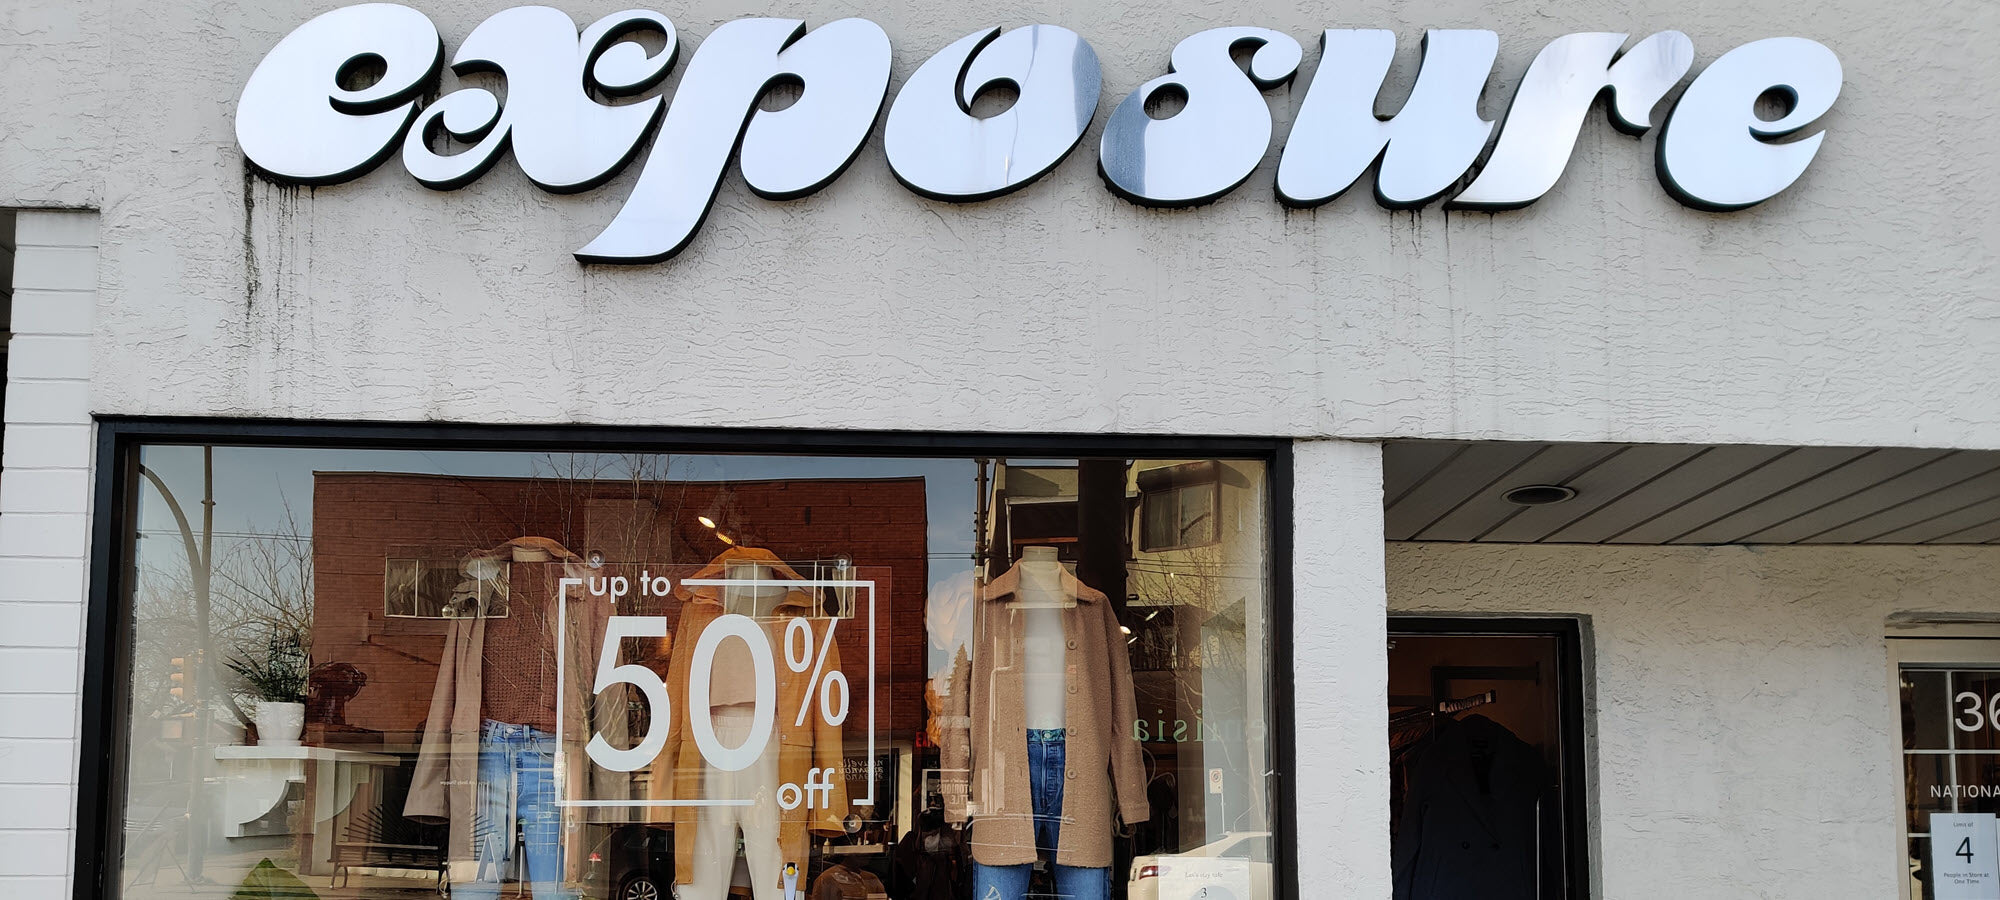 Exposure Clothing - Main Street Store - Exterior - Clothing for Women